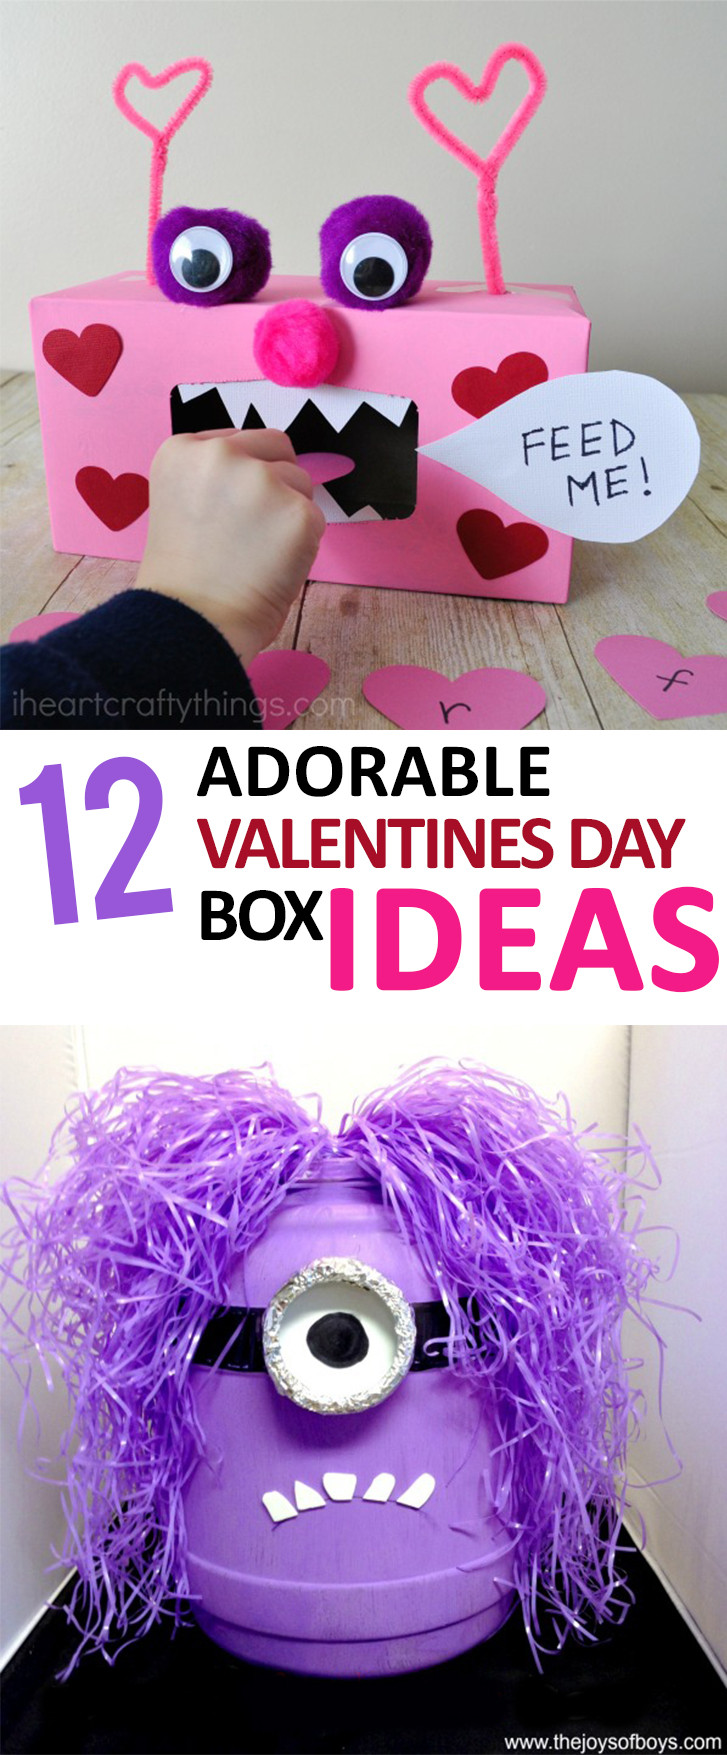 Valentines Day Boxes Ideas
 12 Adorable Valentines Day Box Ideas – Sunlit Spaces